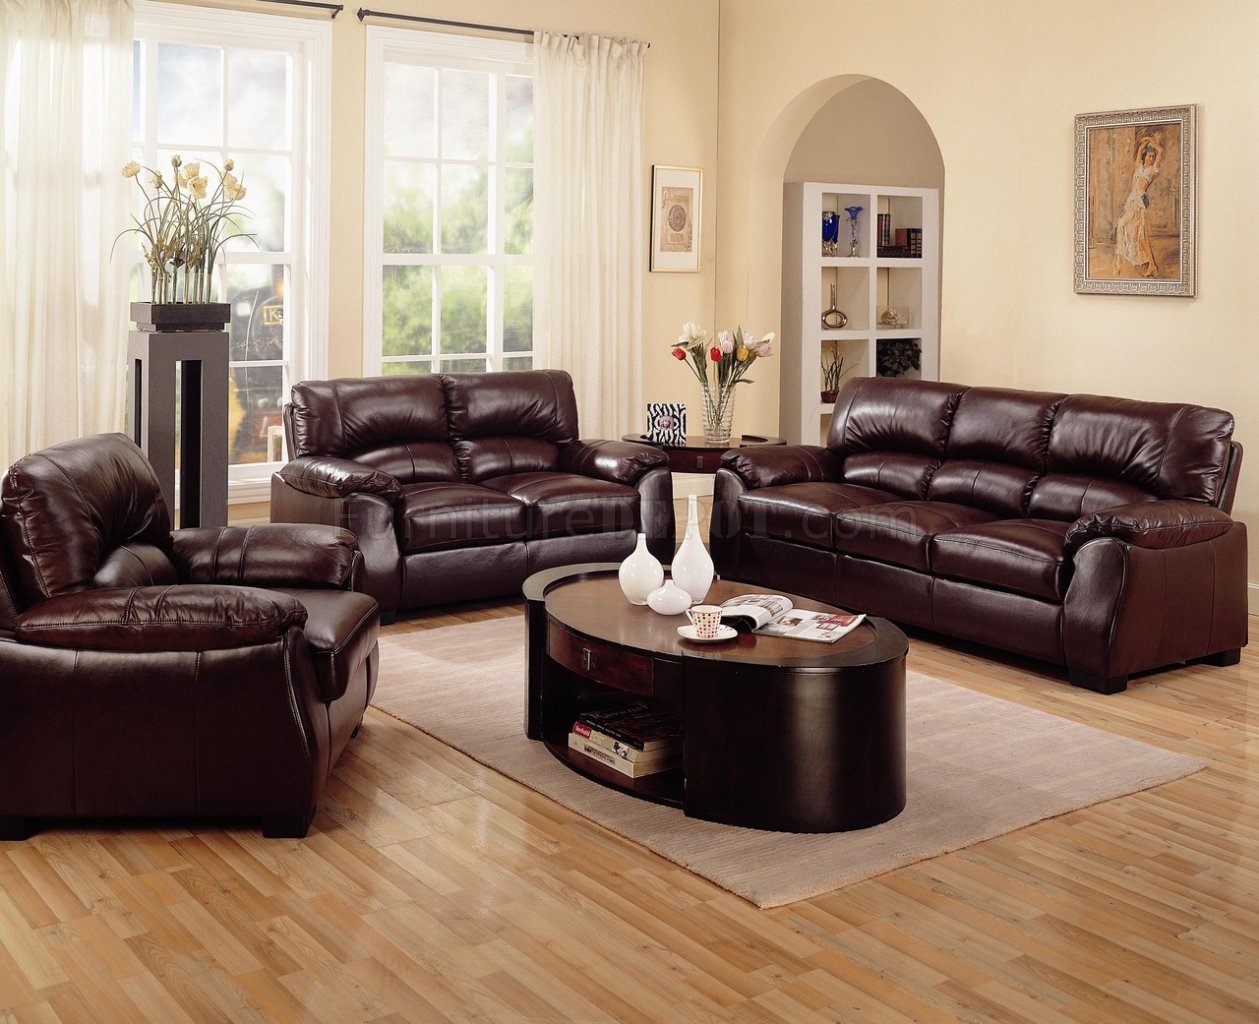 Different Coloured Leather Sofas In Living Room